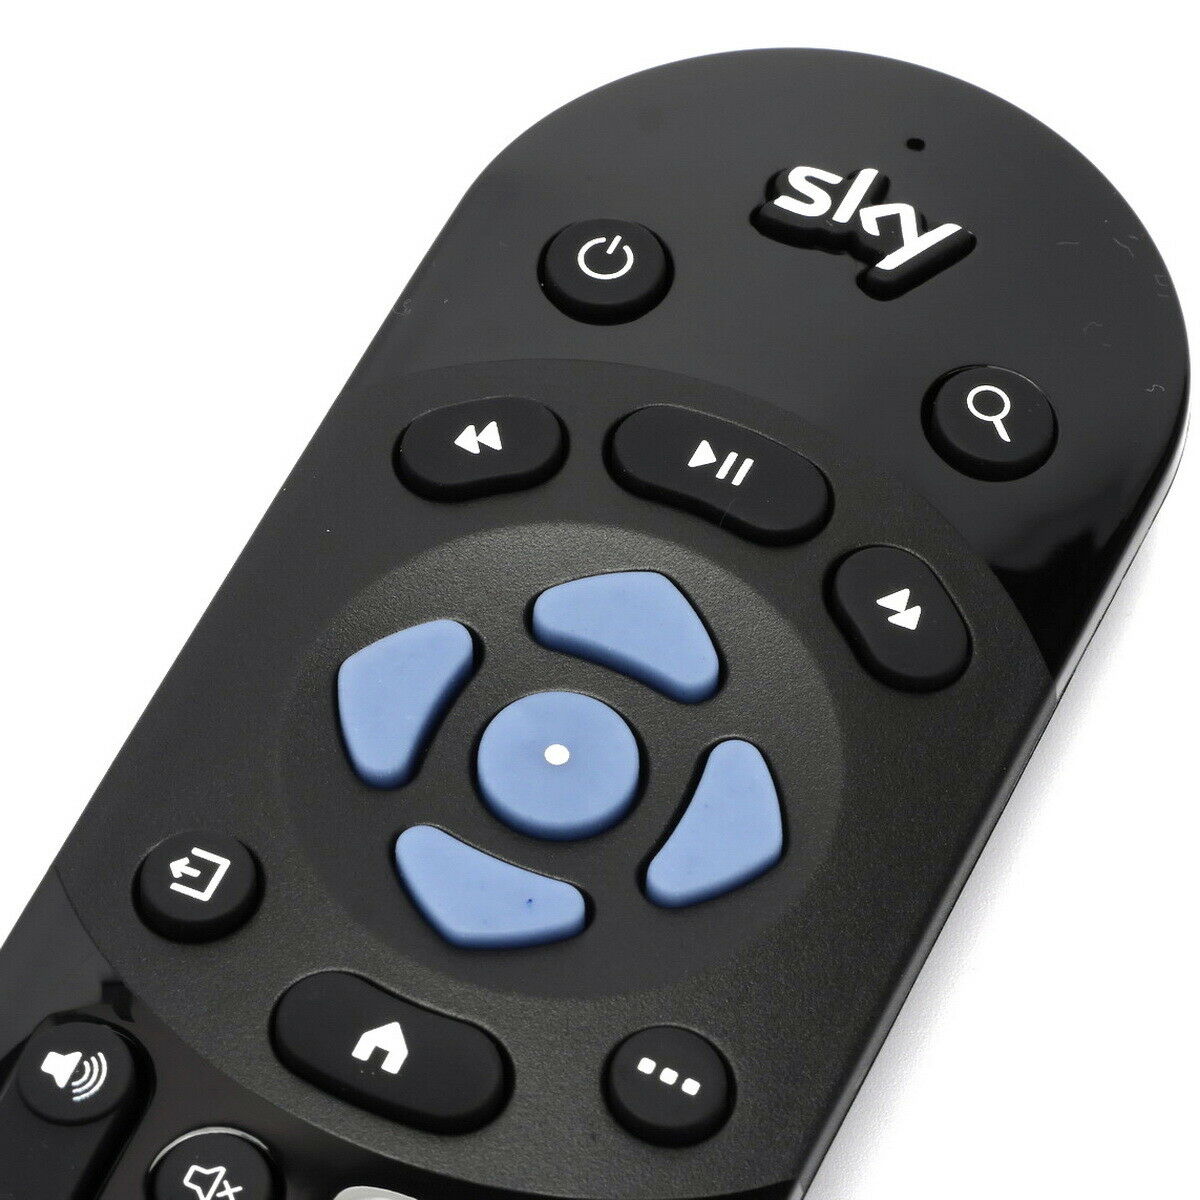 E57065-Universal-Replacement-Infrared-Remote-Control-For-Sky-Q-Version-2-TV-Box-1671331-8